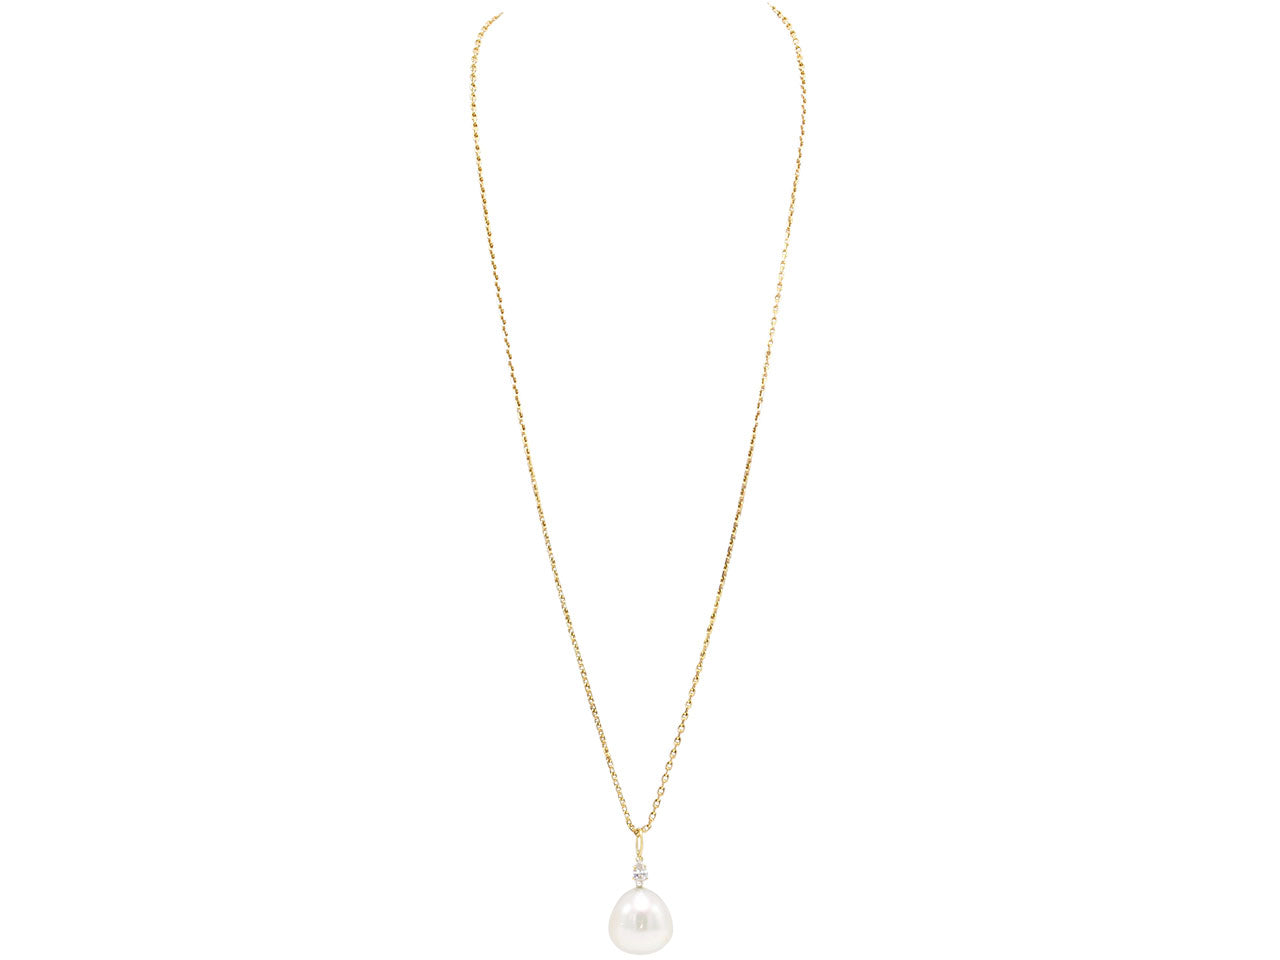 South Sea Pearl and Diamond Chain Pendant in 18K Gold